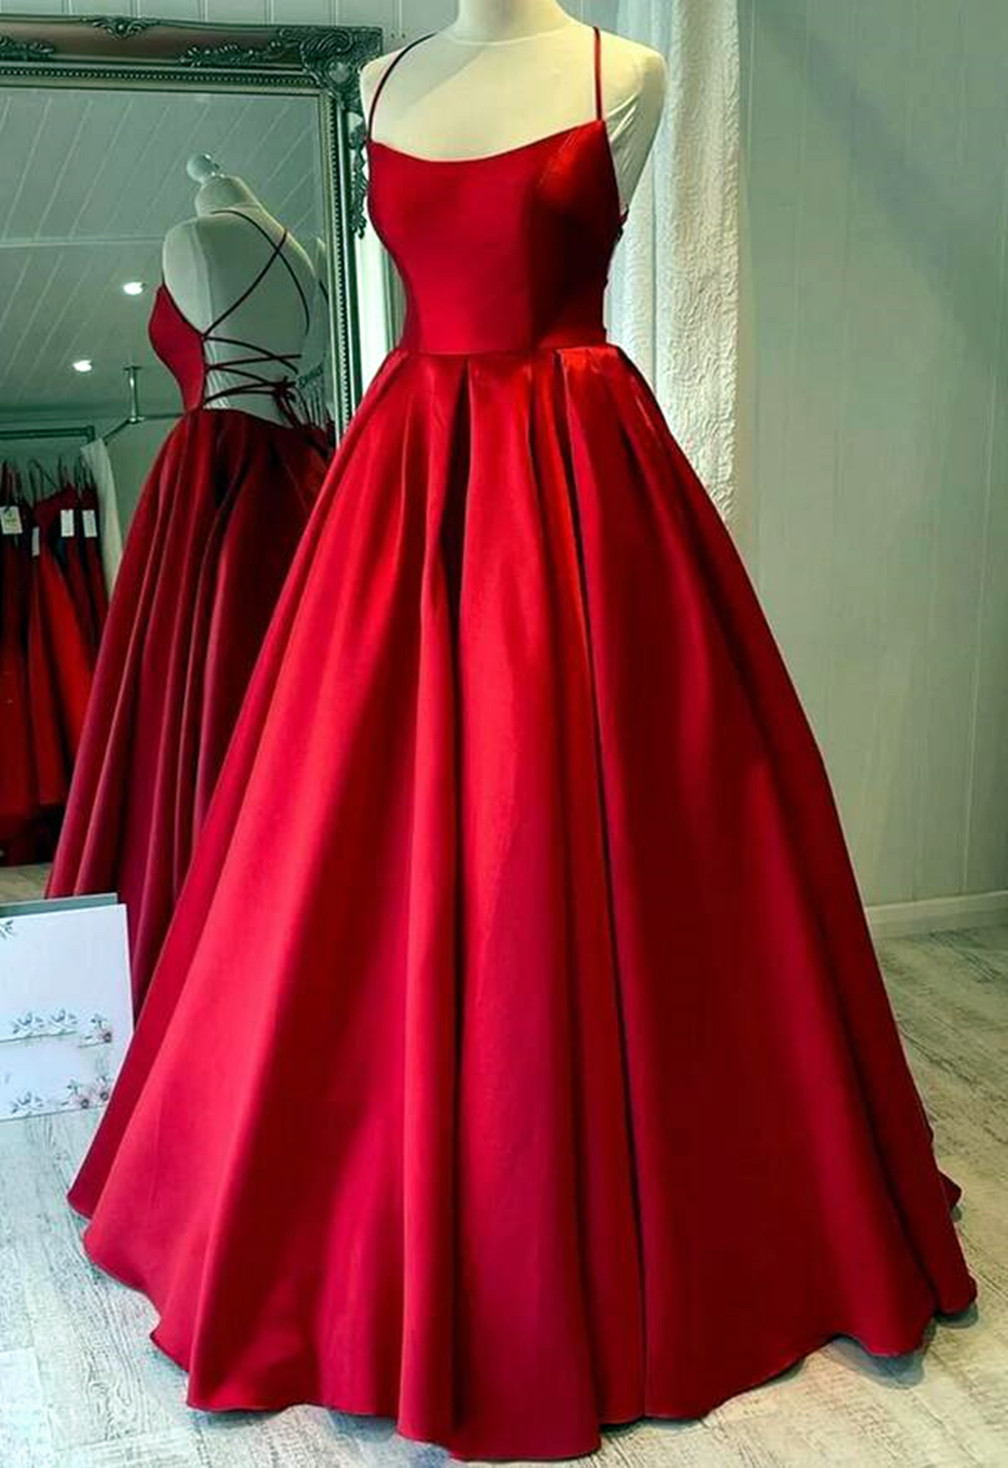 Women Spaghetti Strap Satin Prom Dresses Long A-line Evening Party Gowns Sleeveless Formal Dress Yp059